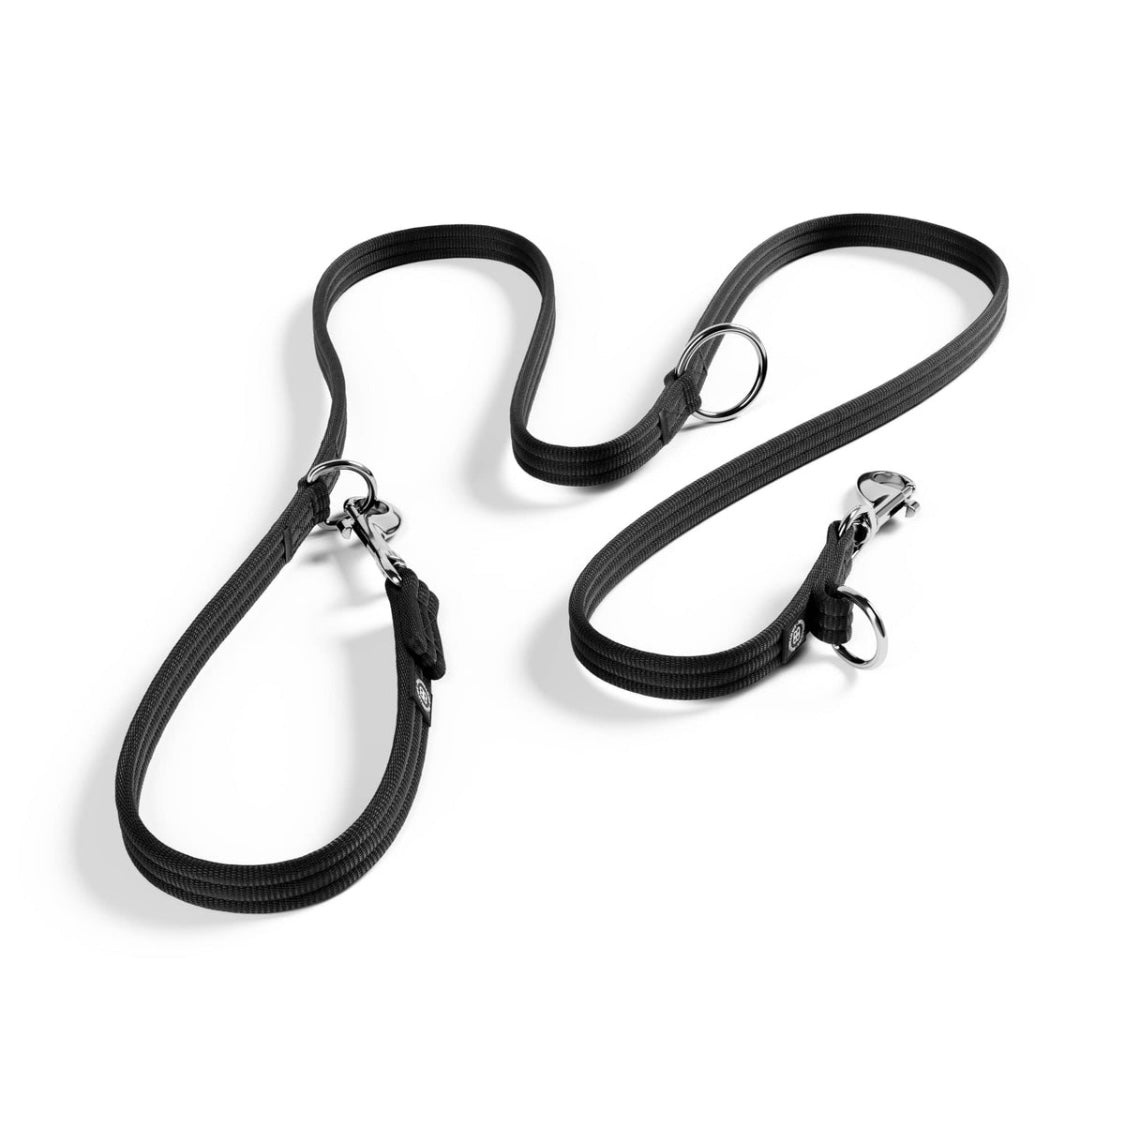 Double Ended Training Lead | All Breeds - Durable & Soft 2m Lead - Black